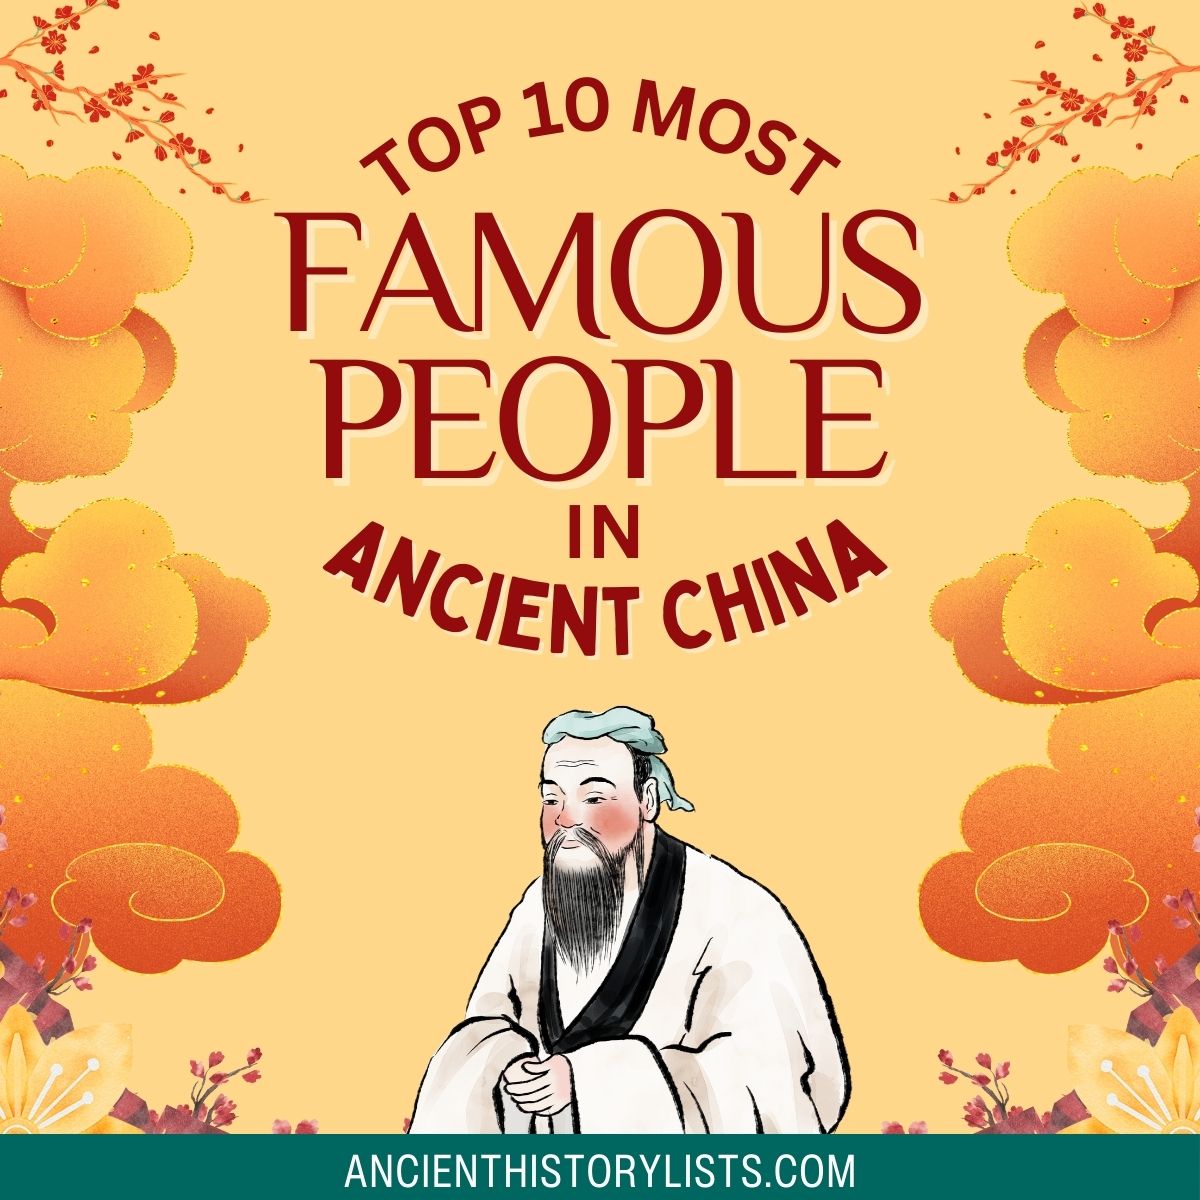 Most Famous People in Ancient China